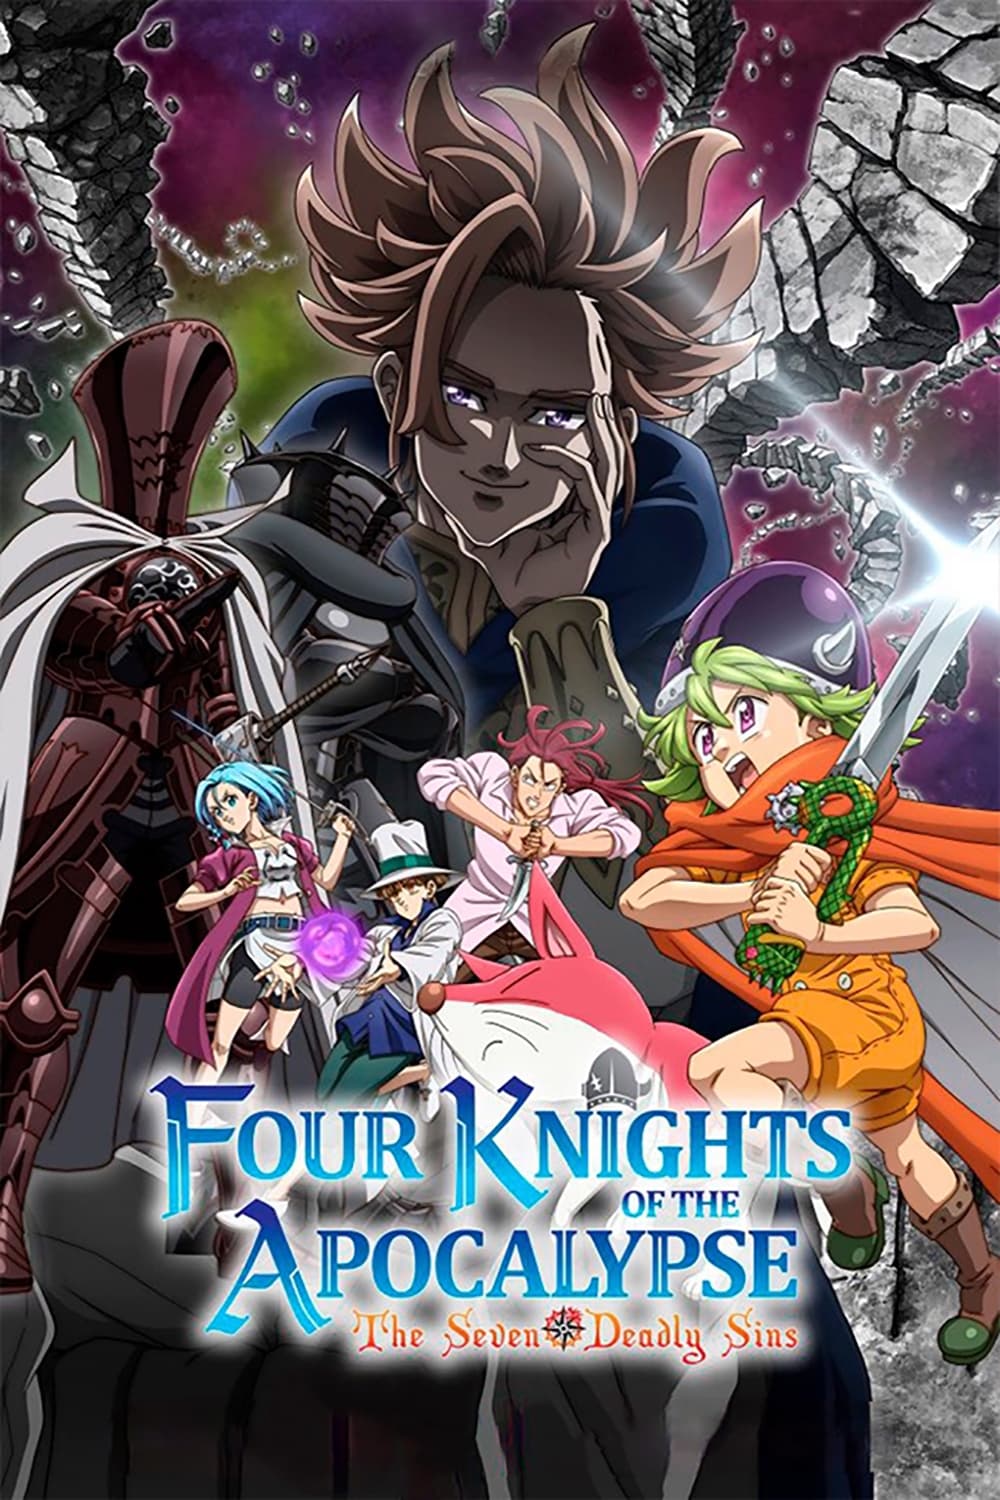 The Seven Deadly Sins - Four Knights of the Apocalypse